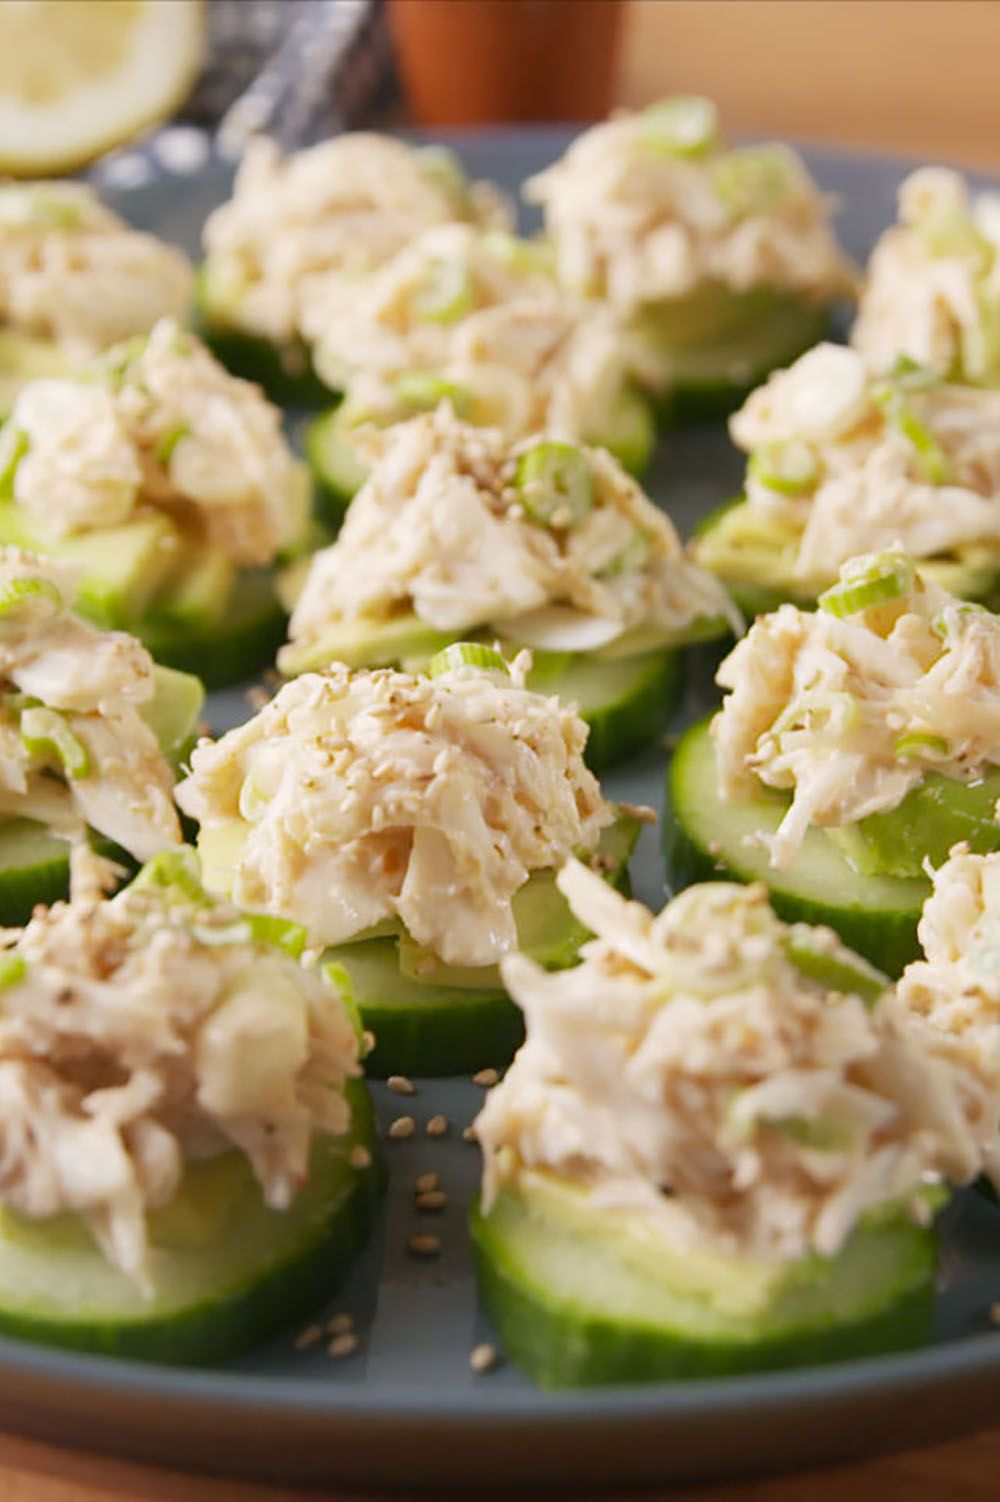 15 Easy Healthy Appetizers Best Recipes For Party Appetizer Ideas